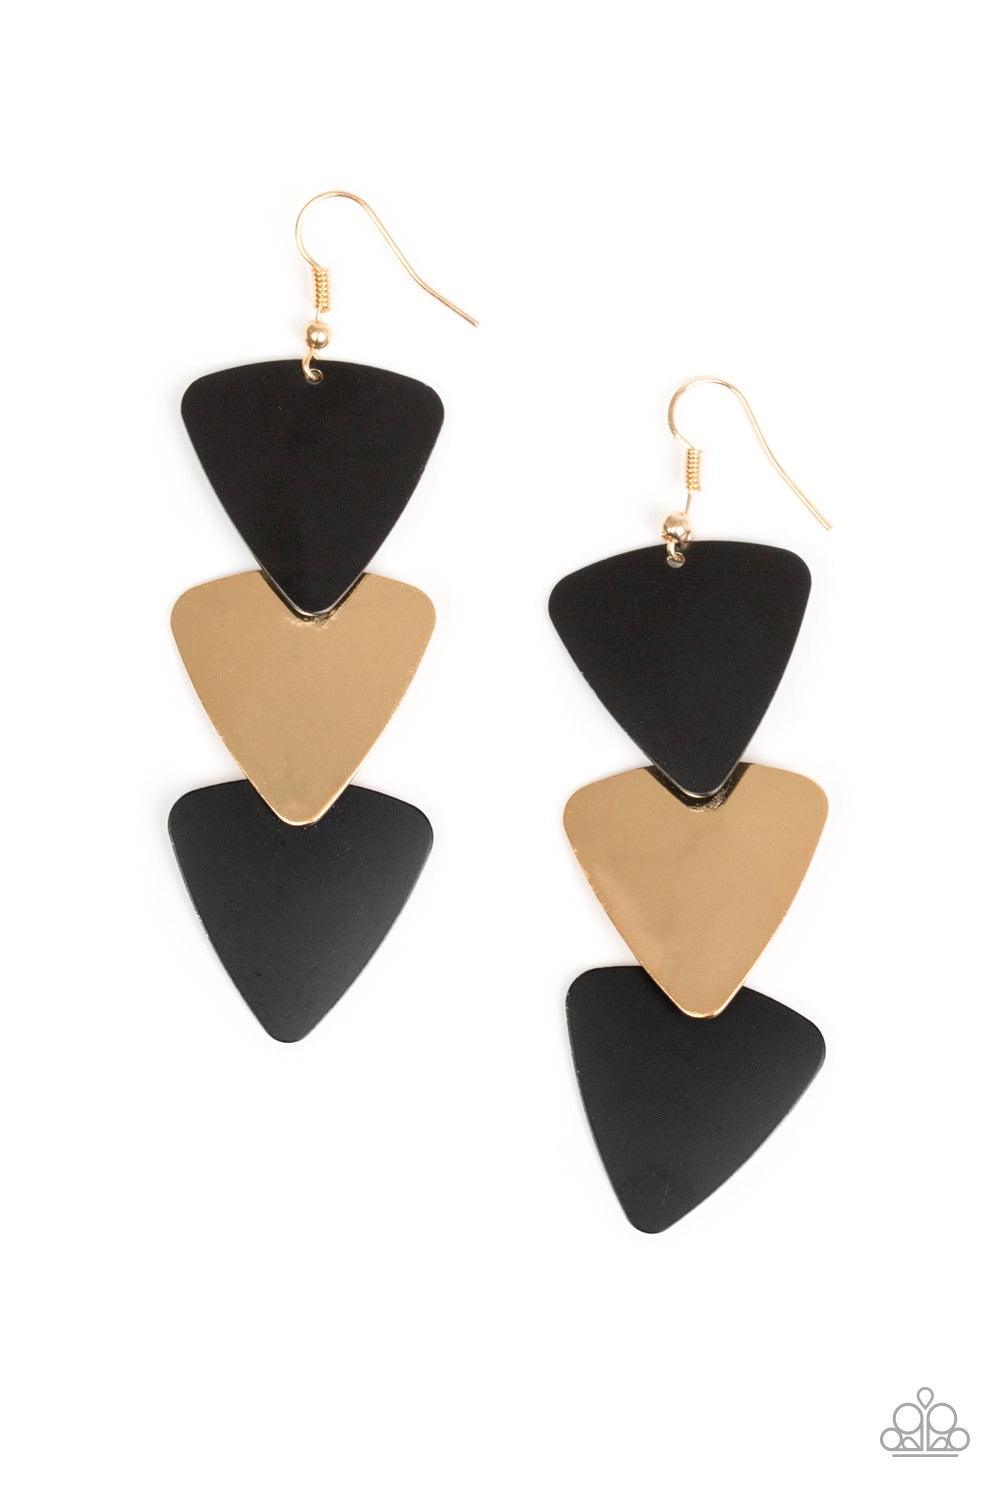 Paparazzi Accessories Terra Trek - Black Brushed in a high-sheen shimmer, glistening black and gold triangular frames cascade from the ear, creating an edgy lure. Earring attaches to a standard fishhook fitting. Jewelry